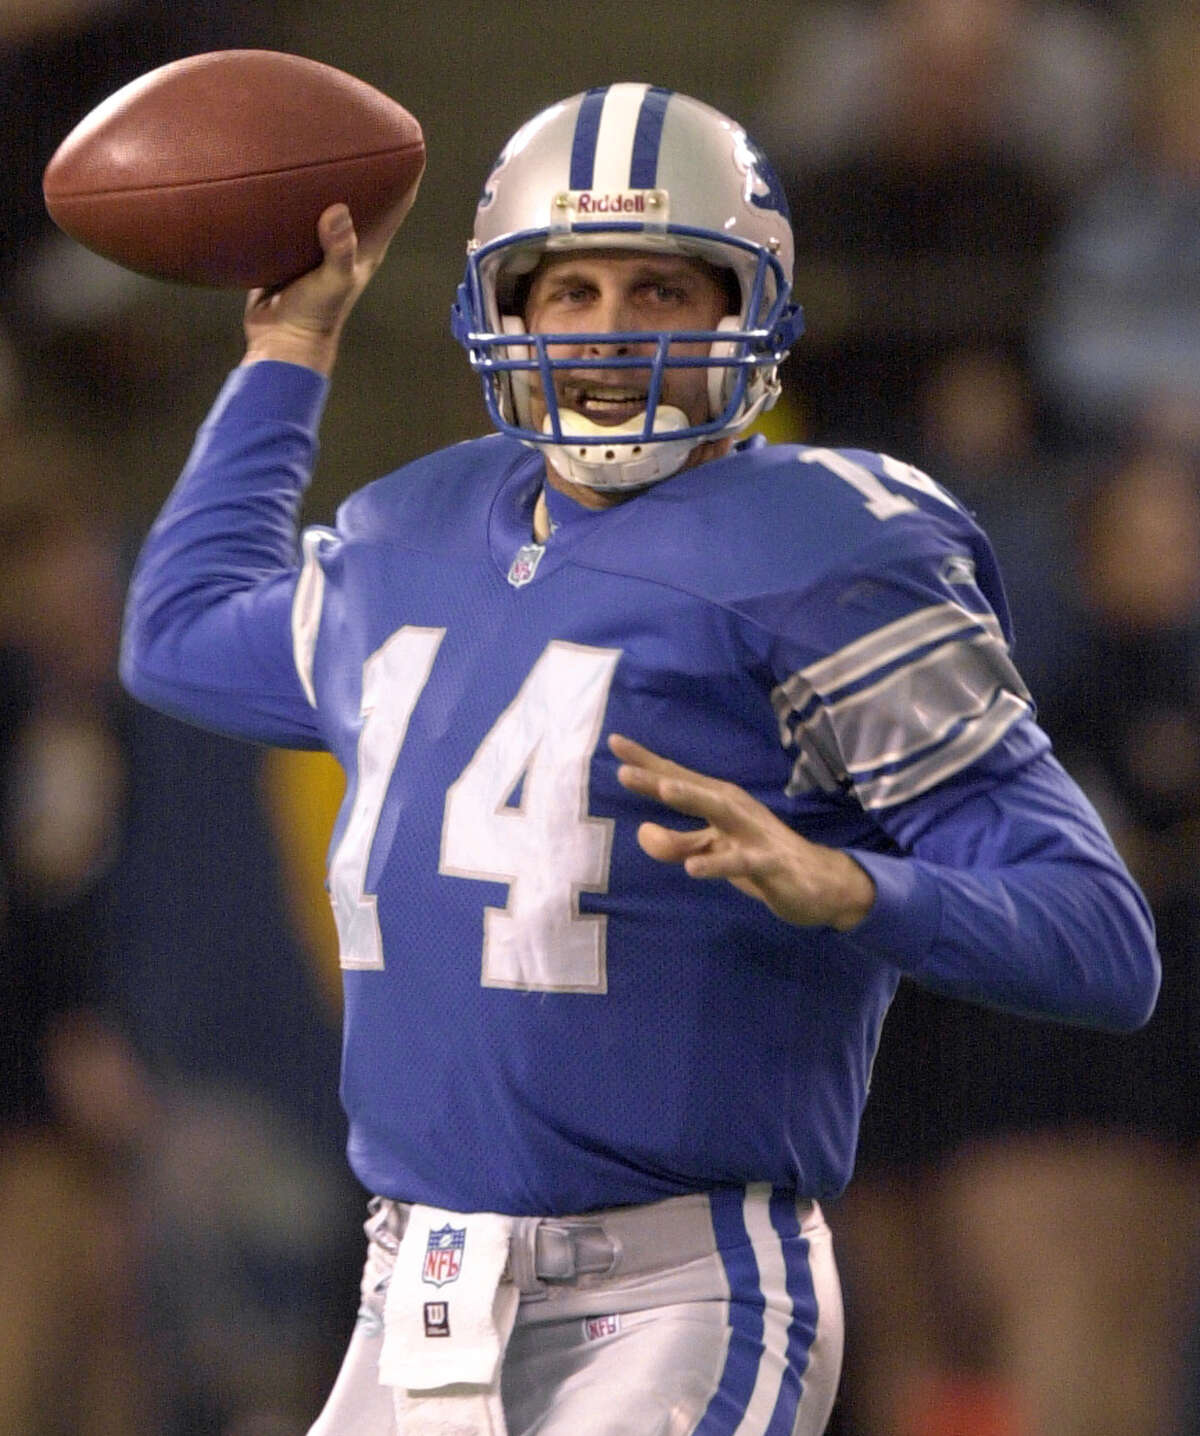 Detroit Lions quarterback Ty Detmer (14) throws against the Dallas Cowboys in the second quarter at the Silverdome in Pontiac, Mich., Sunday, Jan. 6, 2001. Detmer was 24-of-40 for 242 yards with two touchdowns and no interceptions in the Lions' 15-10 win. (AP Photo/Paul Sancya)